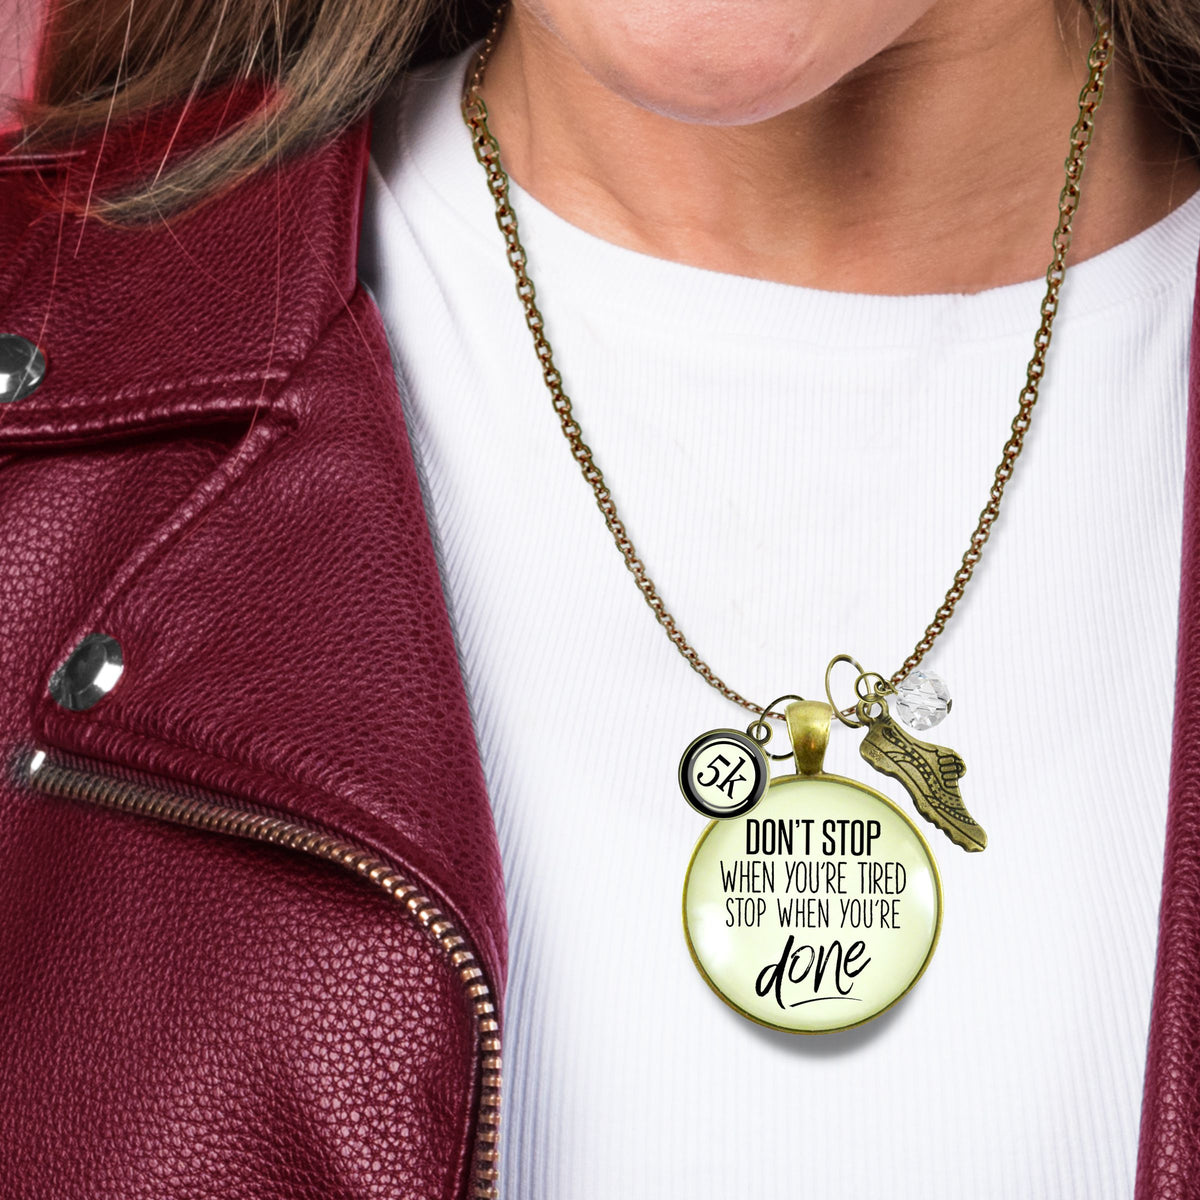 5K Marathon Necklace Don't Stop When You're Tired Motivational Run Sport Charm  Necklace - Gutsy Goodness Handmade Jewelry